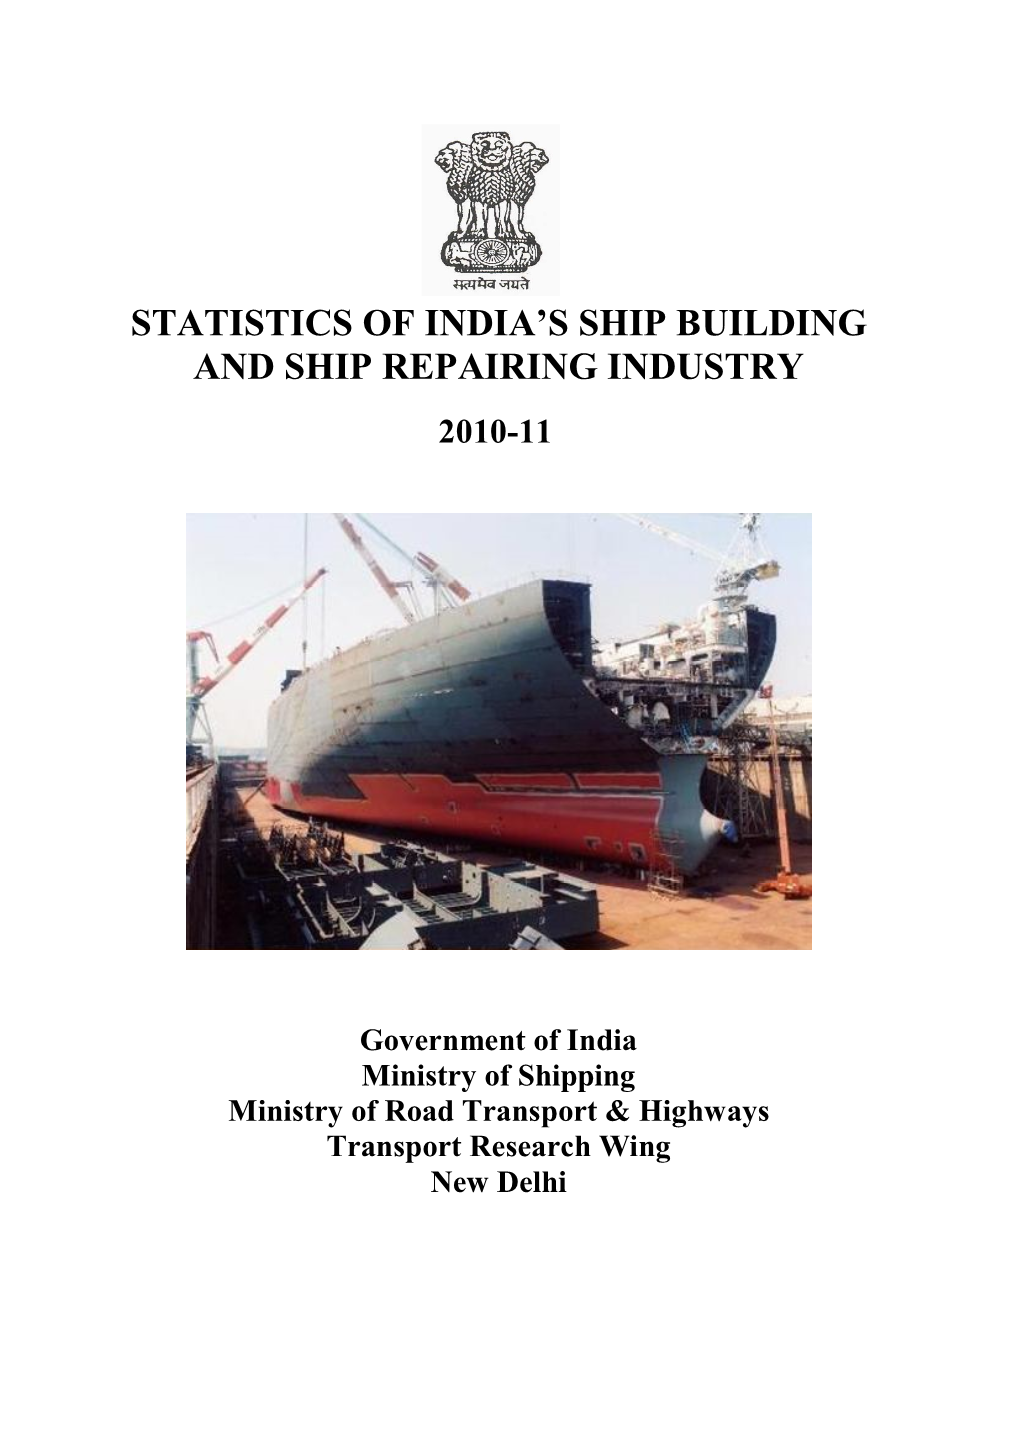 Statistics of India's Ship Building and Ship Repairing